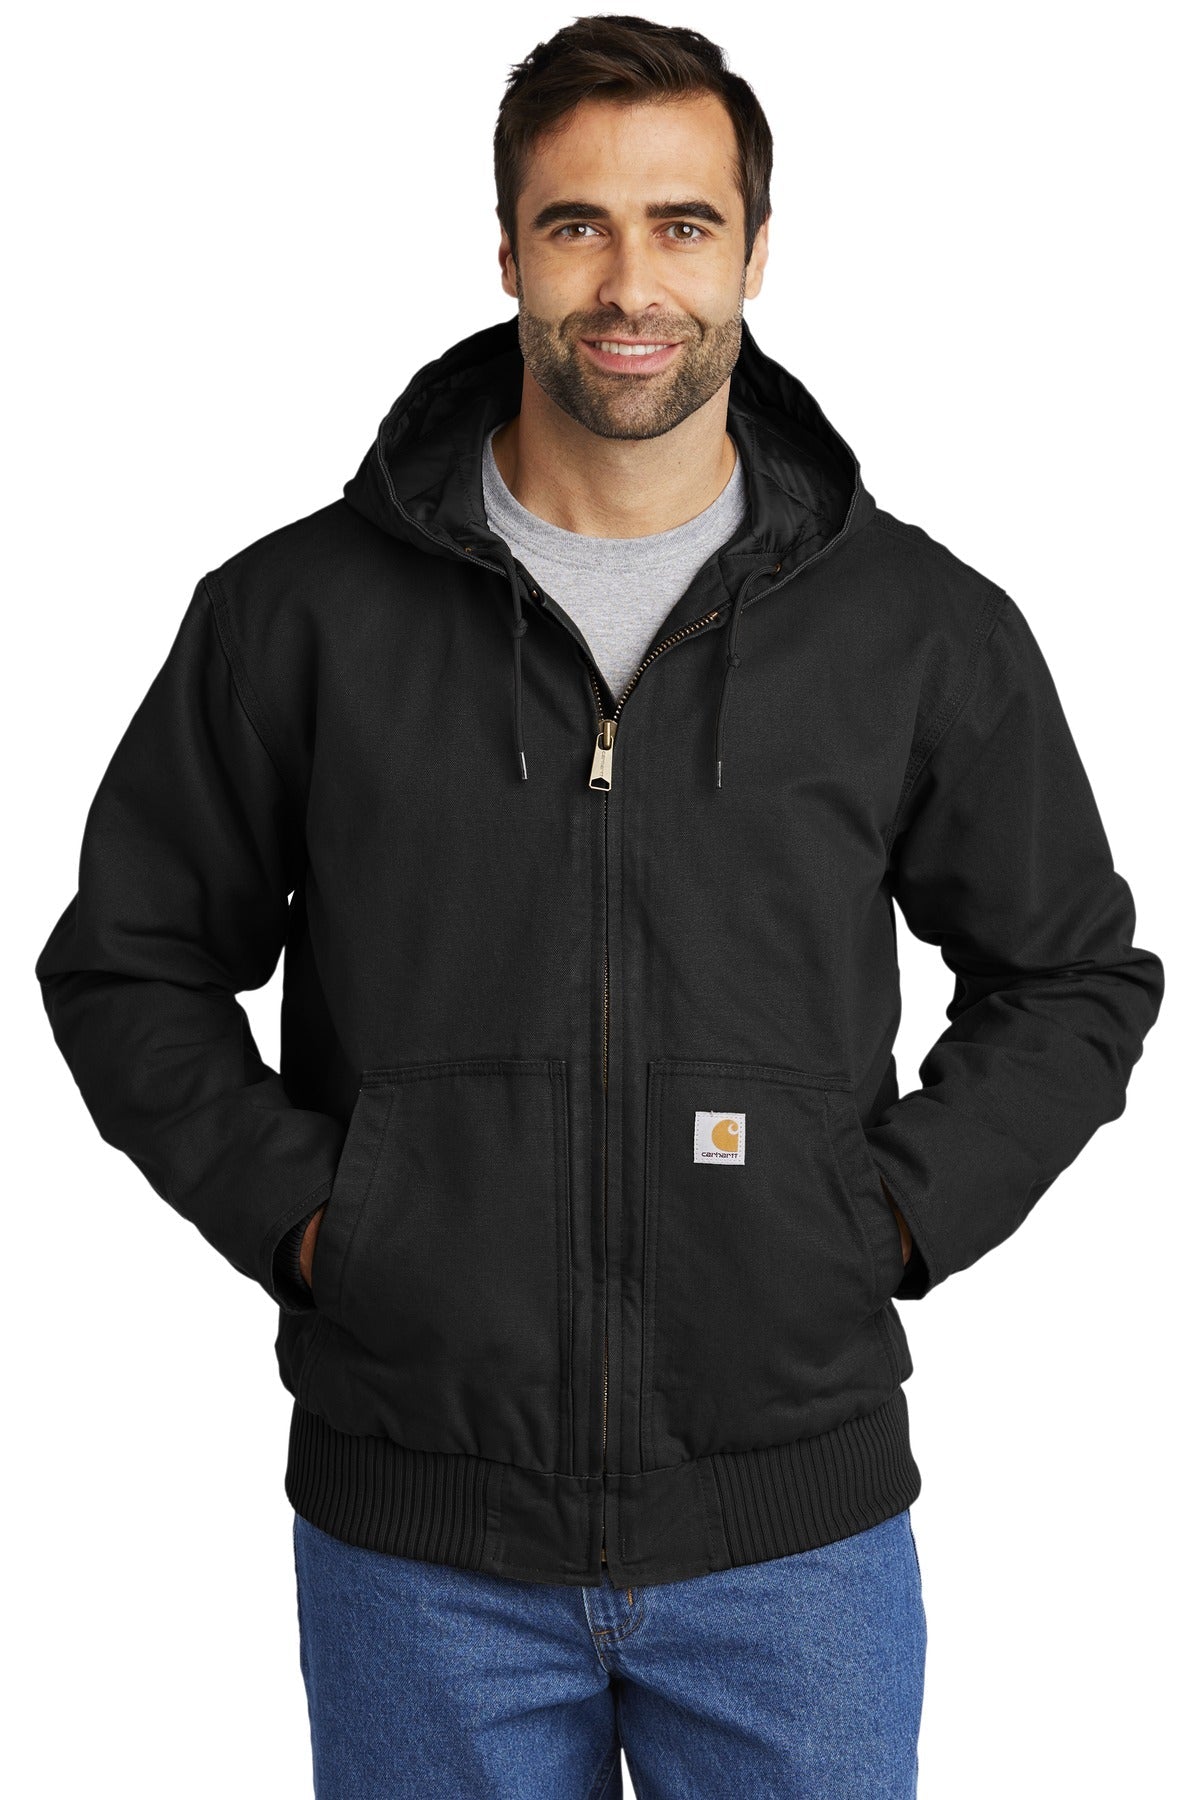 Carhartt® Tall Washed Duck Active Jac. CTT104050 - DFW Impression